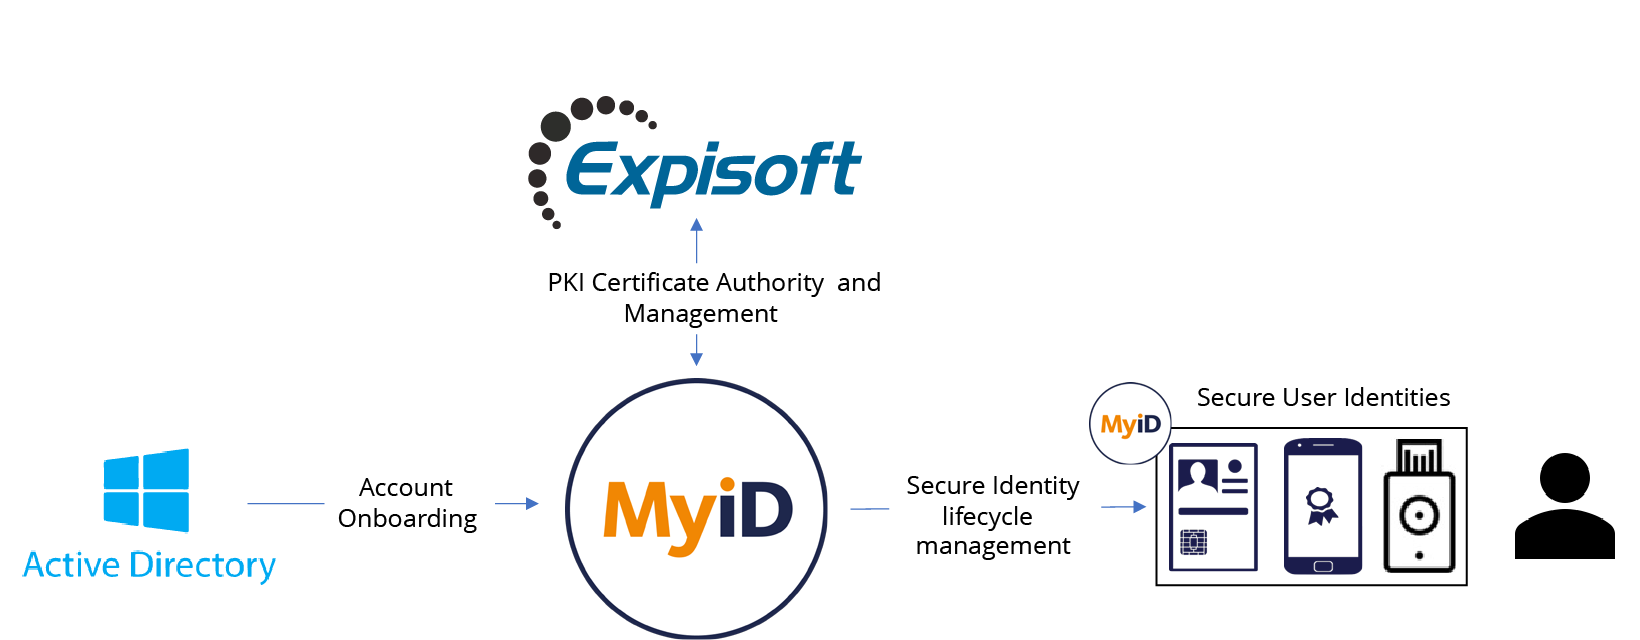 A MANAGED SOLUTION TO DEPLOY SIMPLE, SECURE, USER-FRIENDLY STRONG AUTHENTICATION